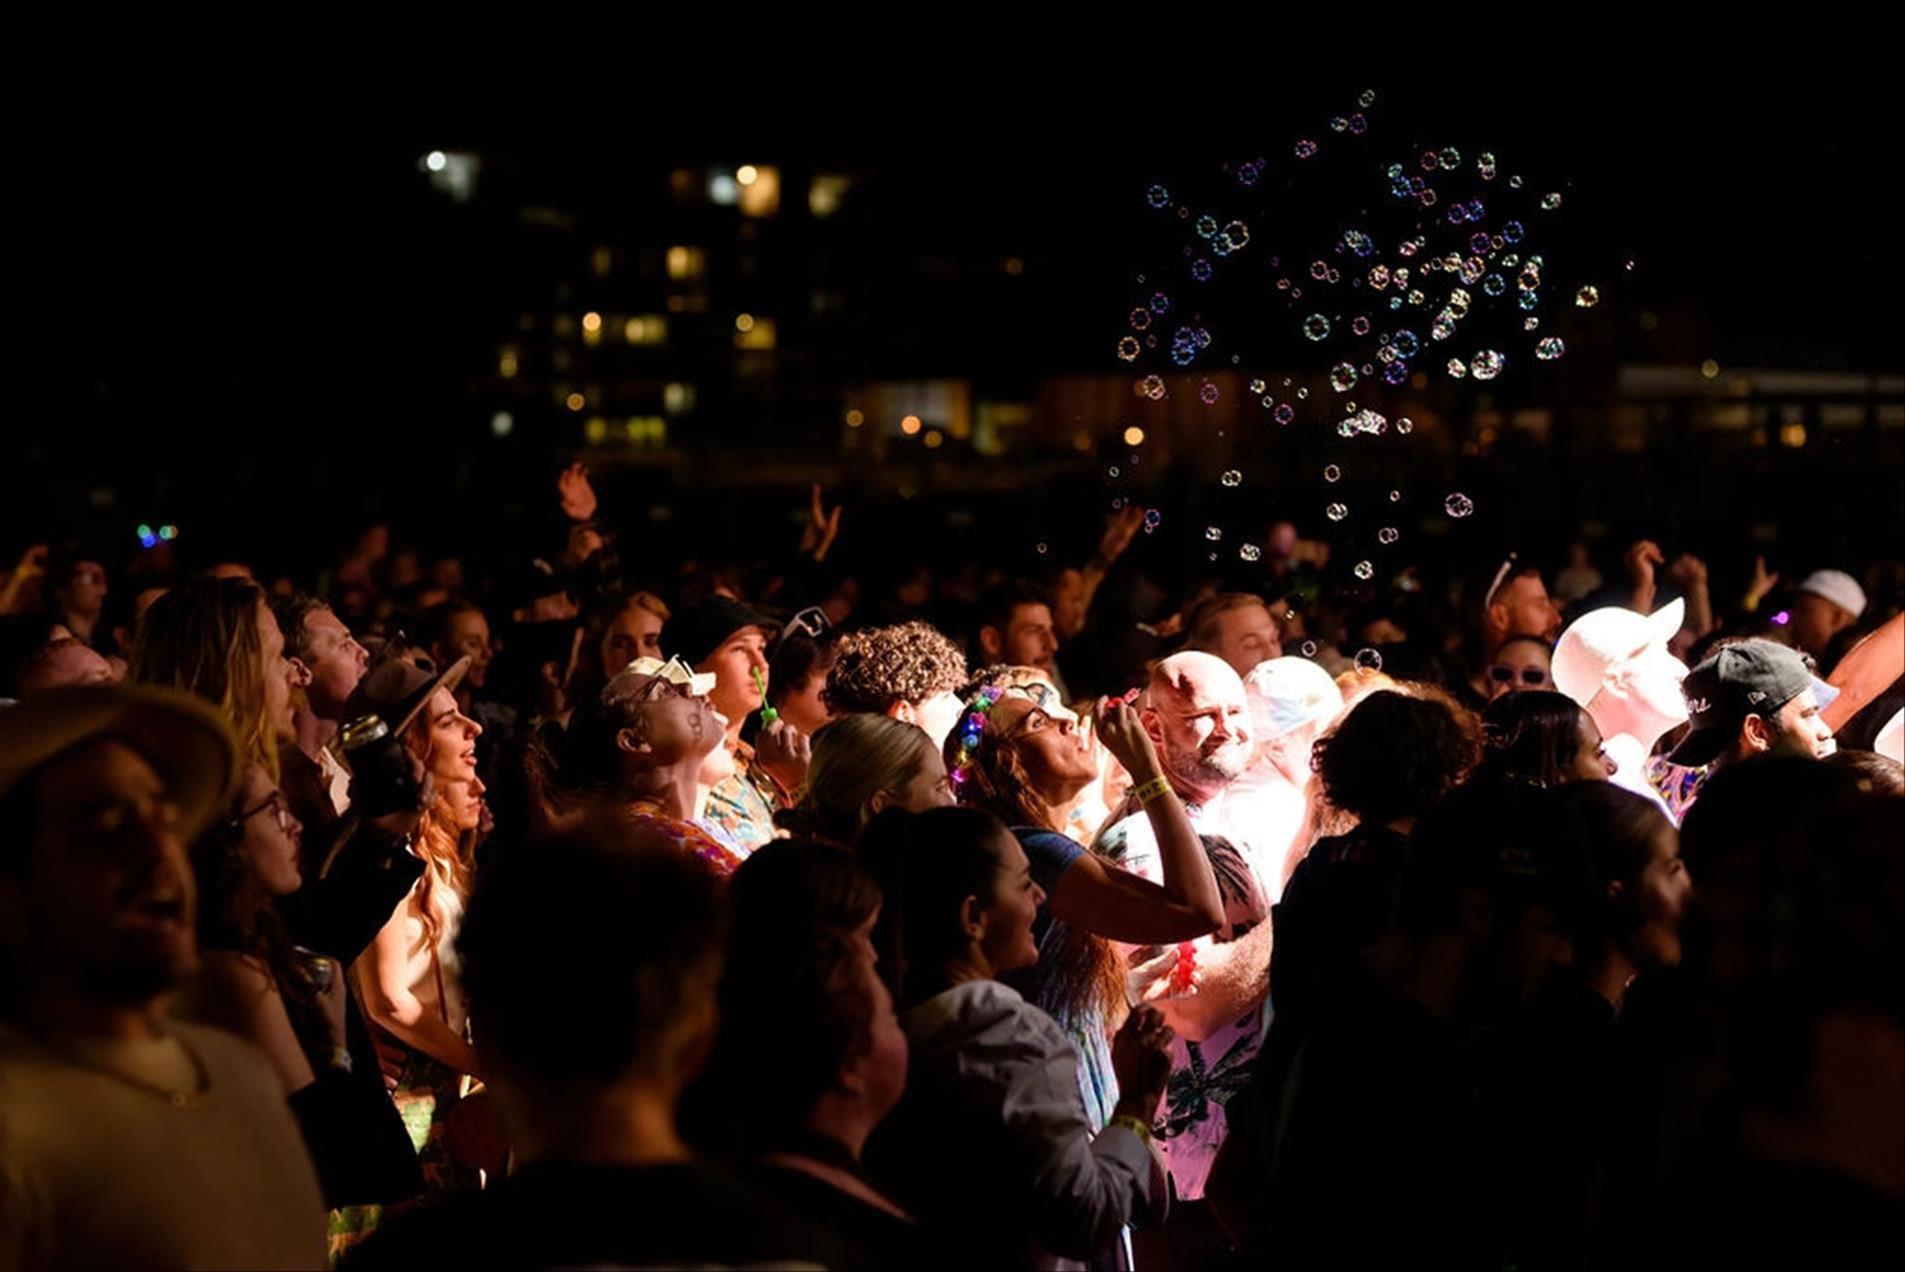 A crowd of people with a woman blowing bubbles into the air.